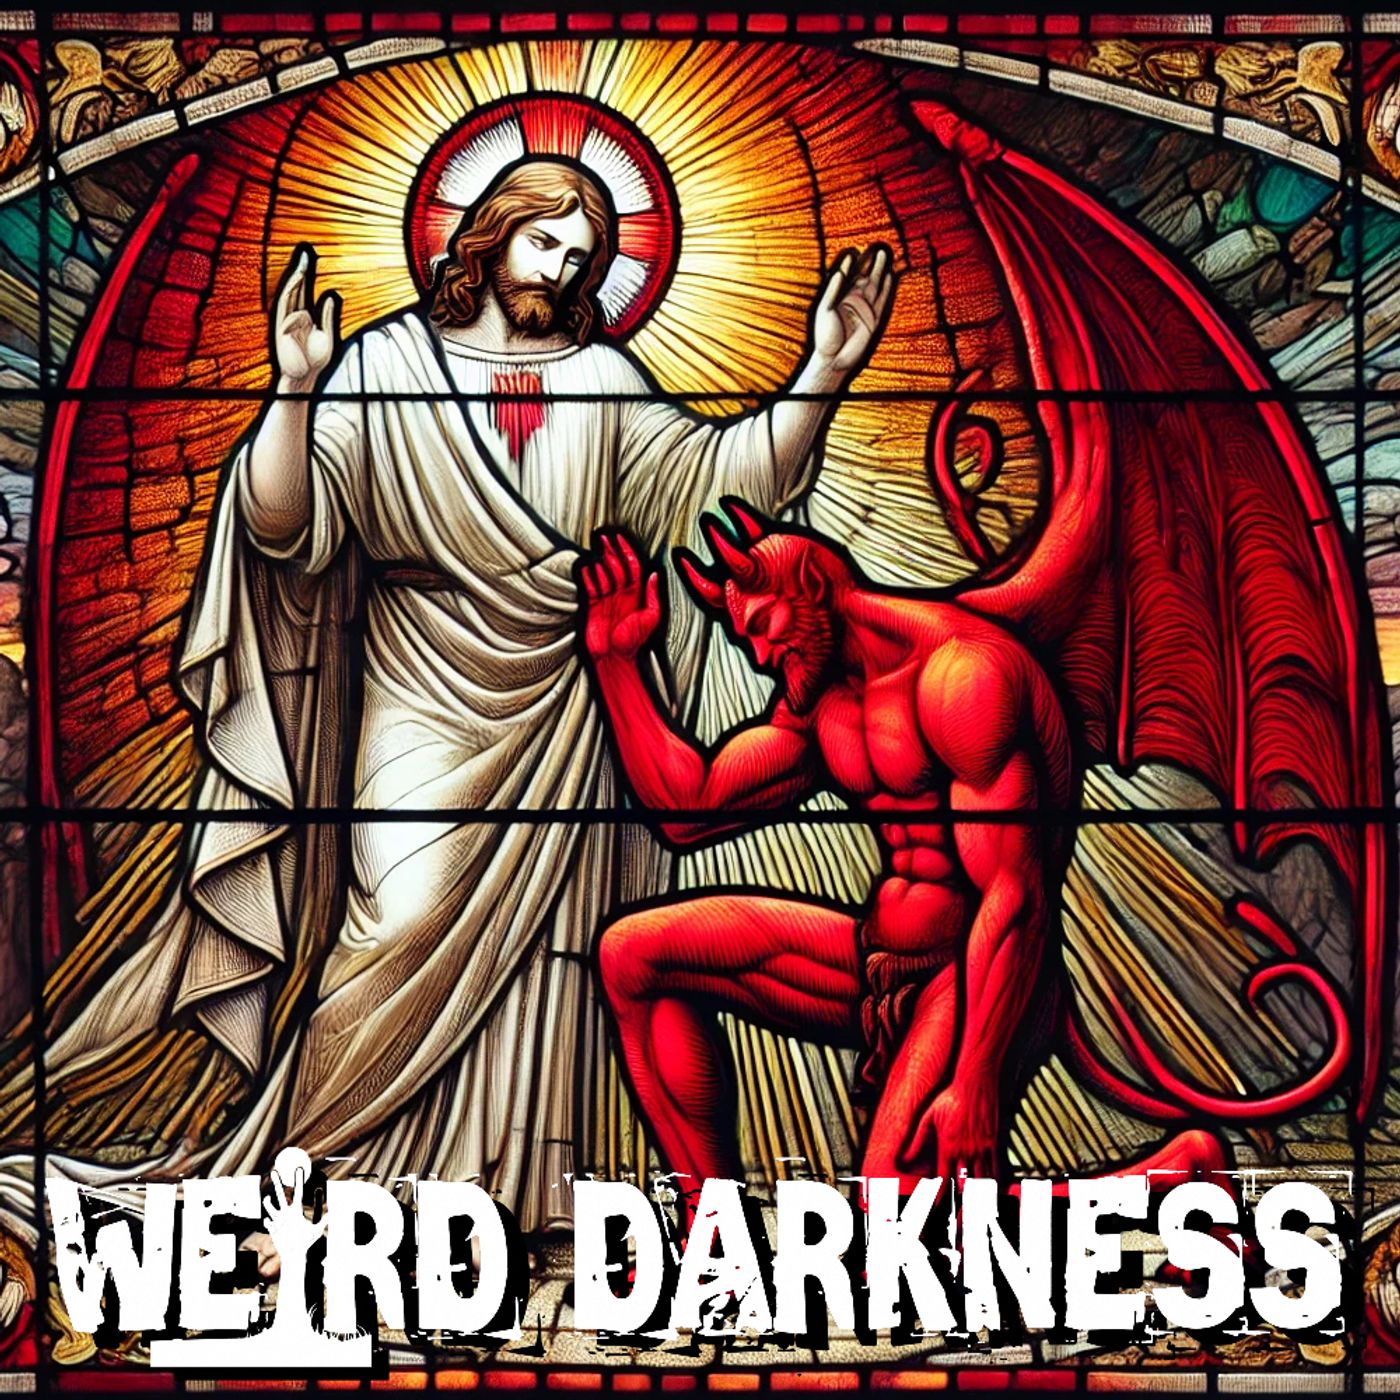 “ORGINS OF THE DEVIL’S ADVOCATE” and More True Stories of Terror! #WeirdDarkness #Darkives